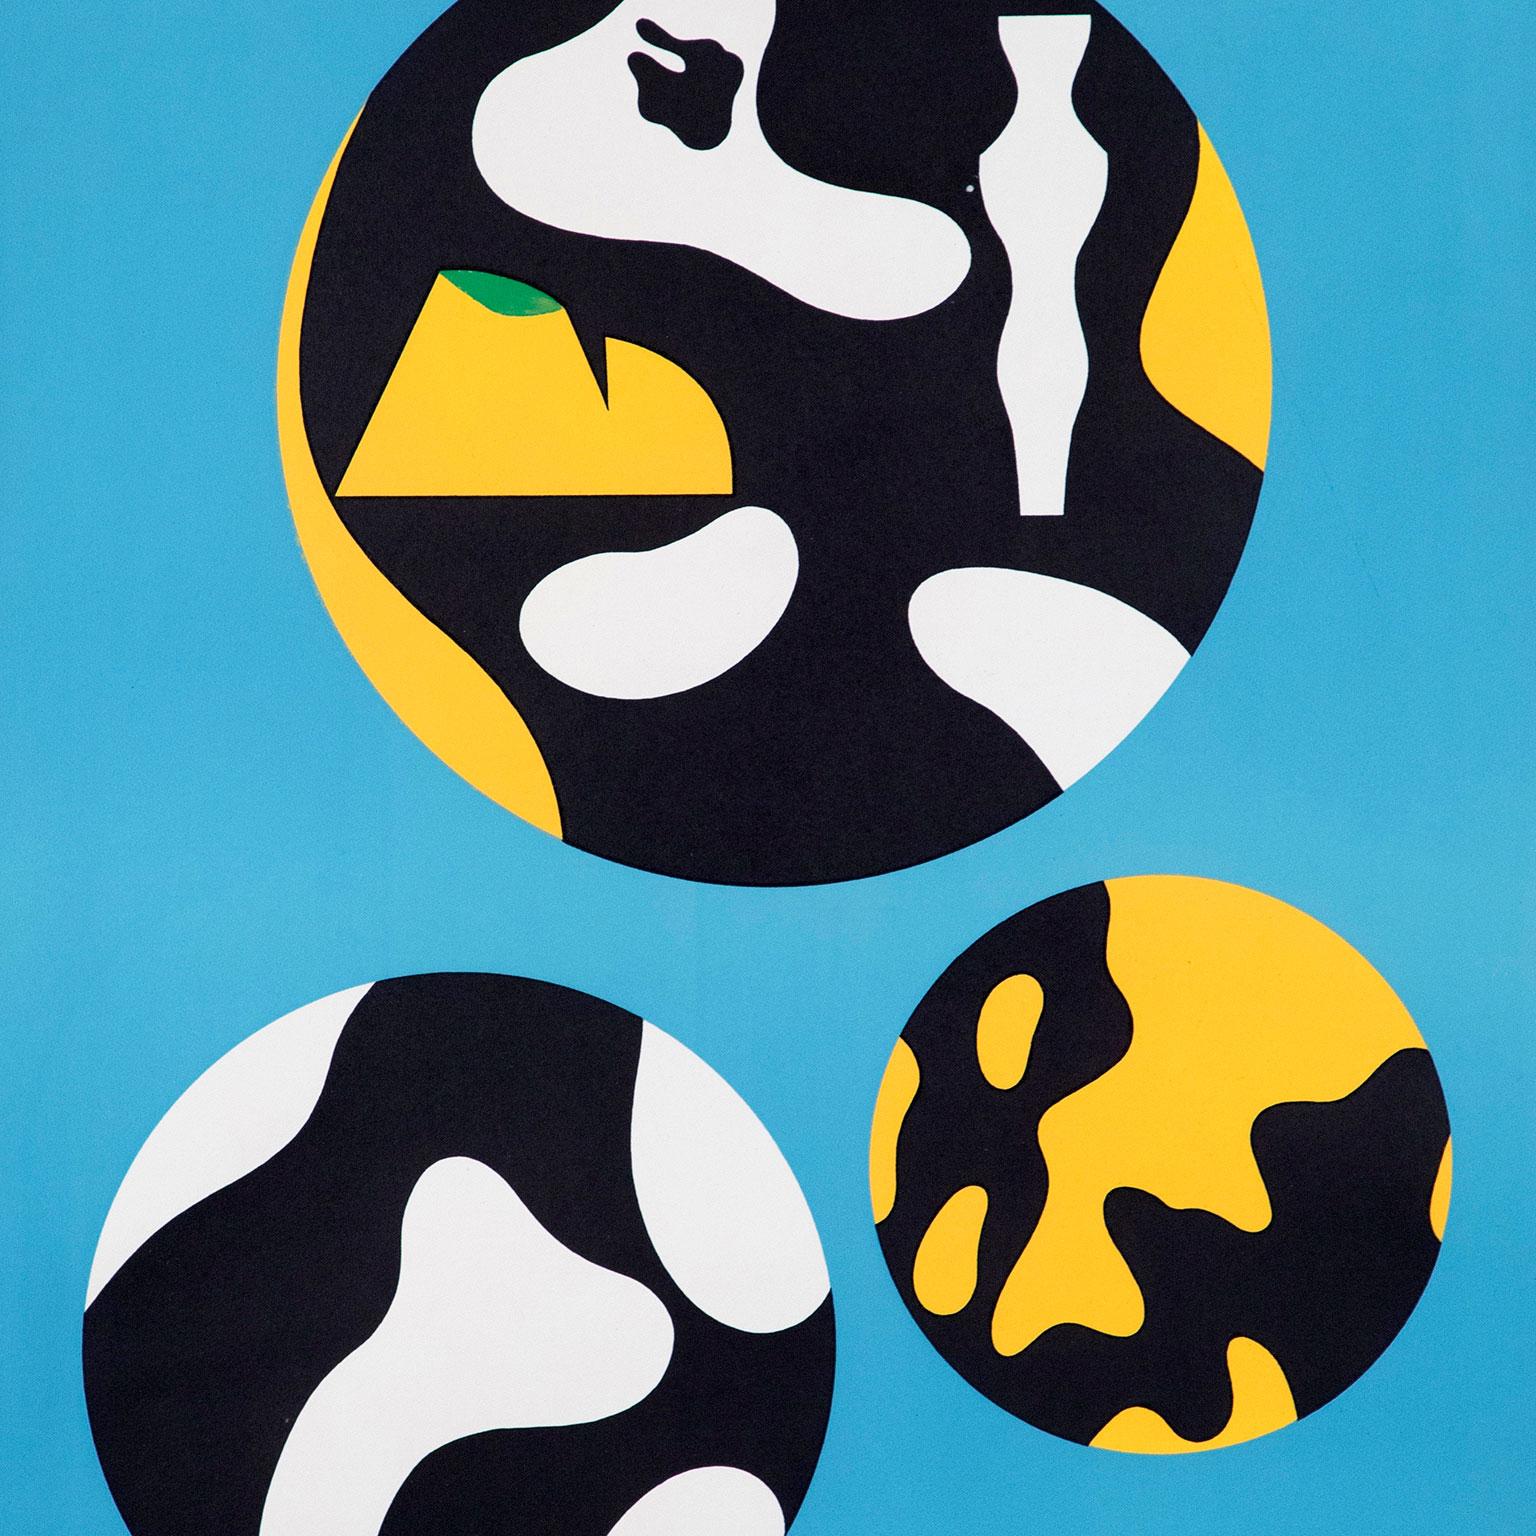 Jean Arp, also known as Hans Arp (1886-1966), was an impressive contributor to the avant-garde movement of the 20th century. Arp was active during the crucial years that shaped European Modernism.

Caviar20 has a strong interest in sculptors who are